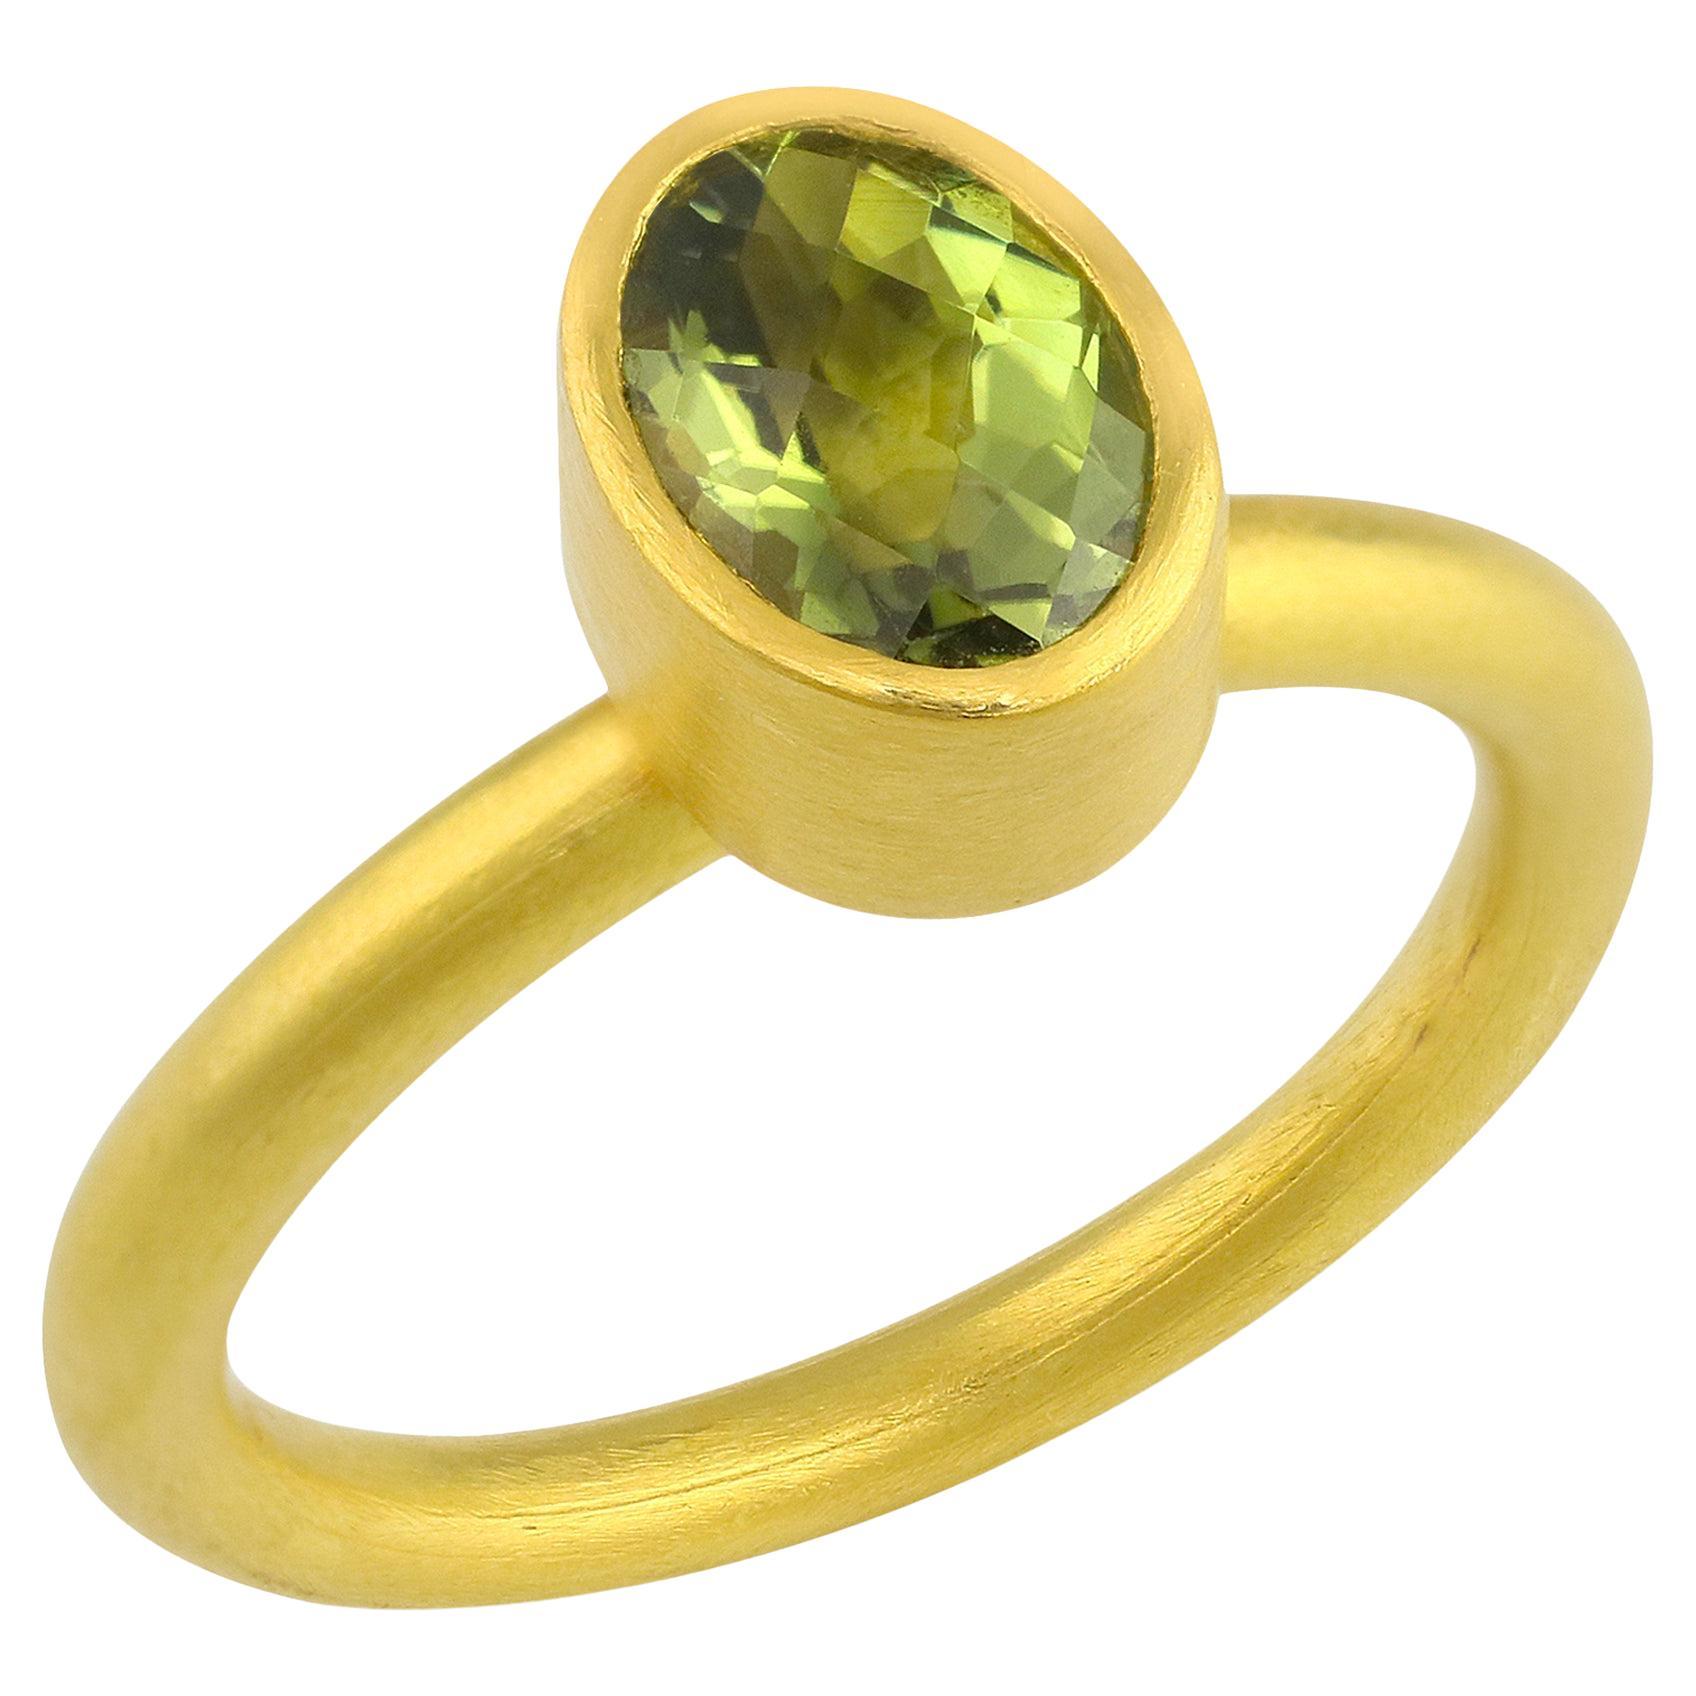 PHILIPPE SPENCER 1.3 Ct. Tourmaline in 22K and 20K Gold Solitaire Ring For Sale